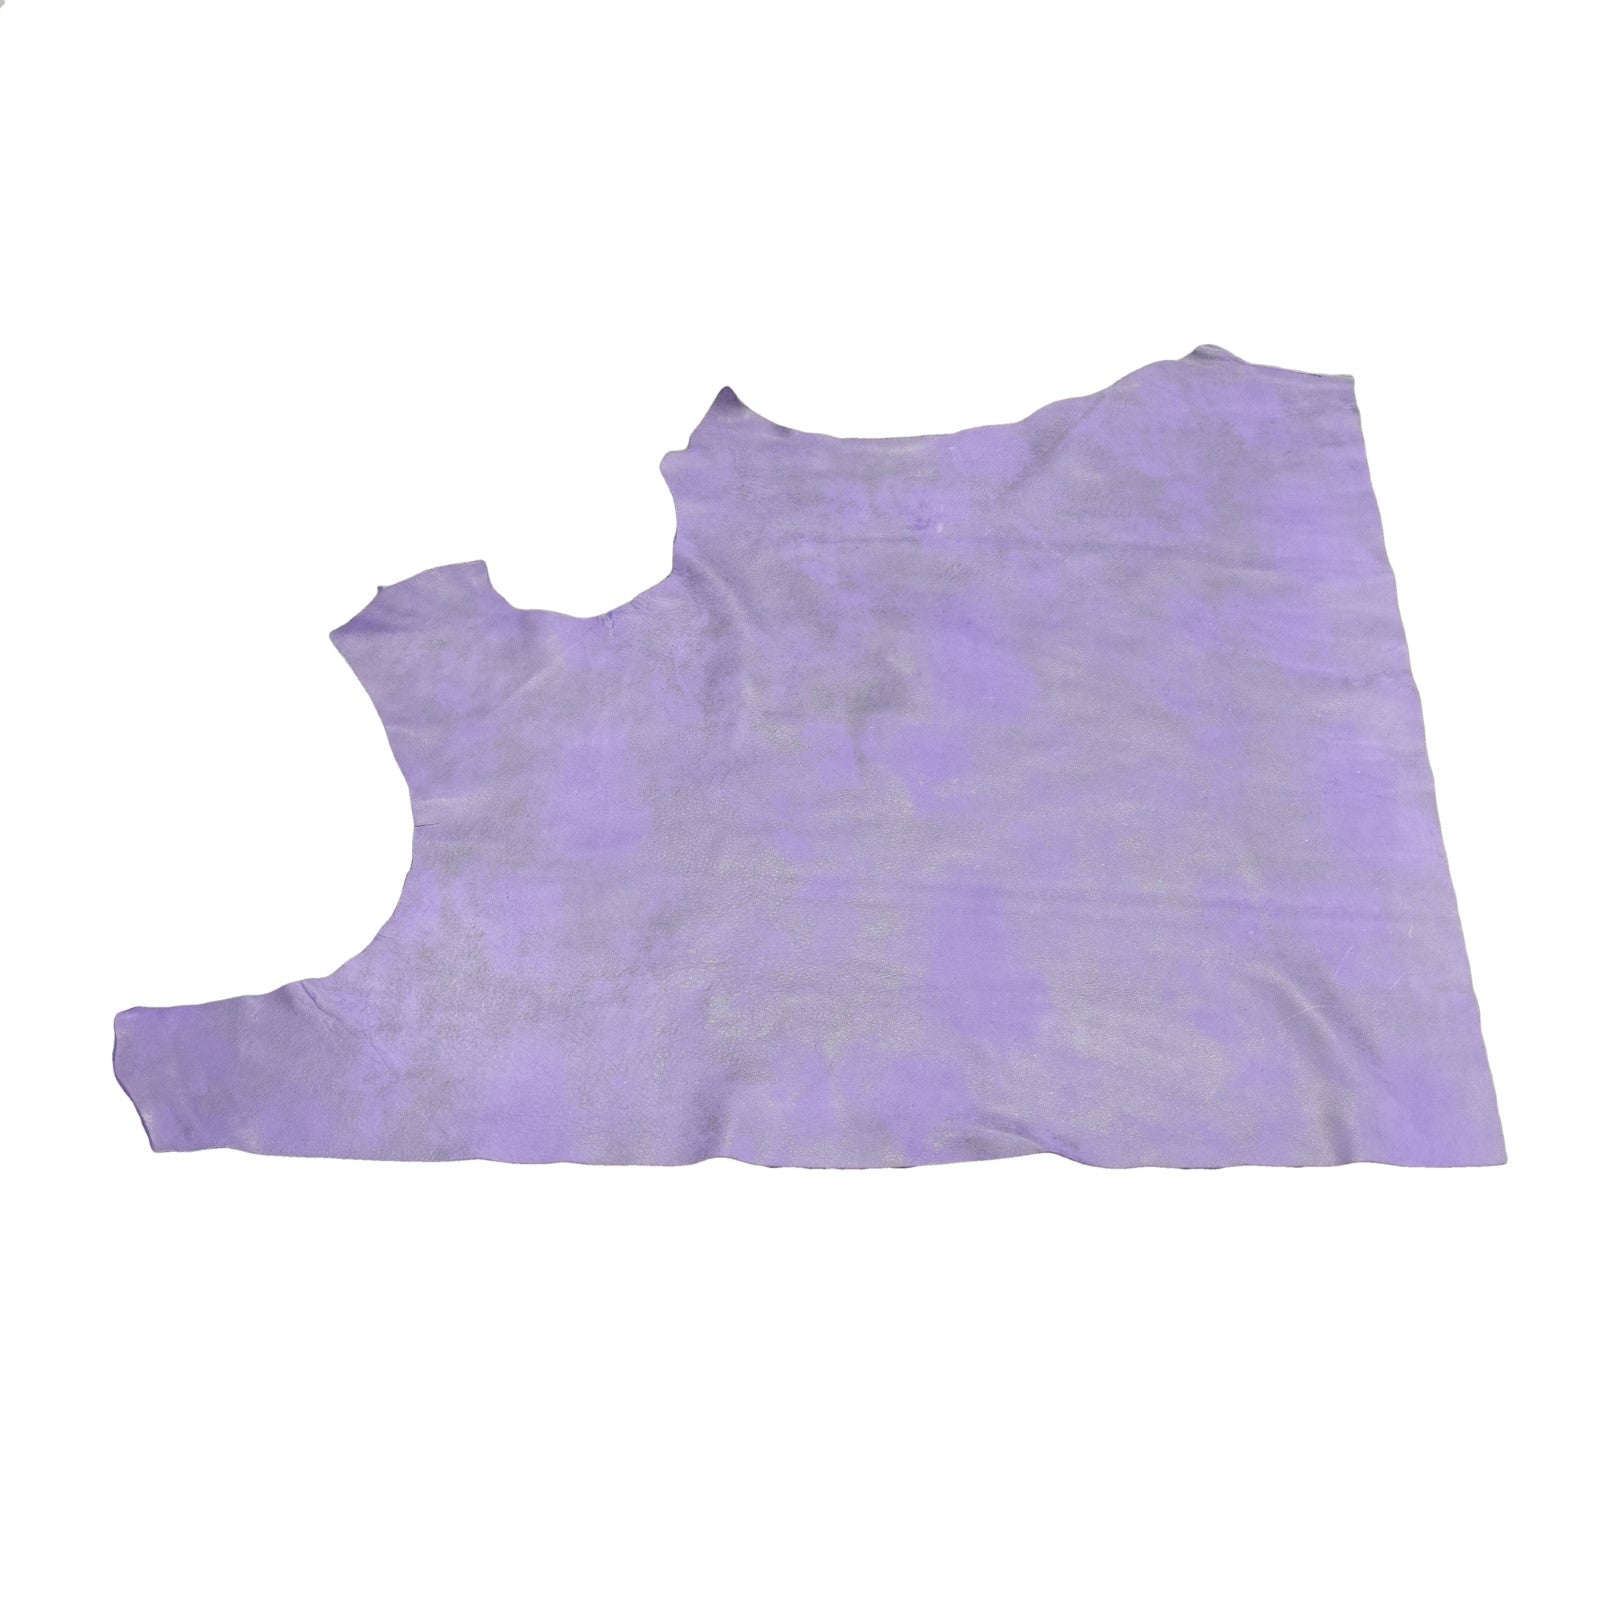 Dearly Beloved Purple Rock N Roll 2-3 oz Leather Cow Hides, 6.5-7.5 Square Foot / Project Piece (Top) | The Leather Guy